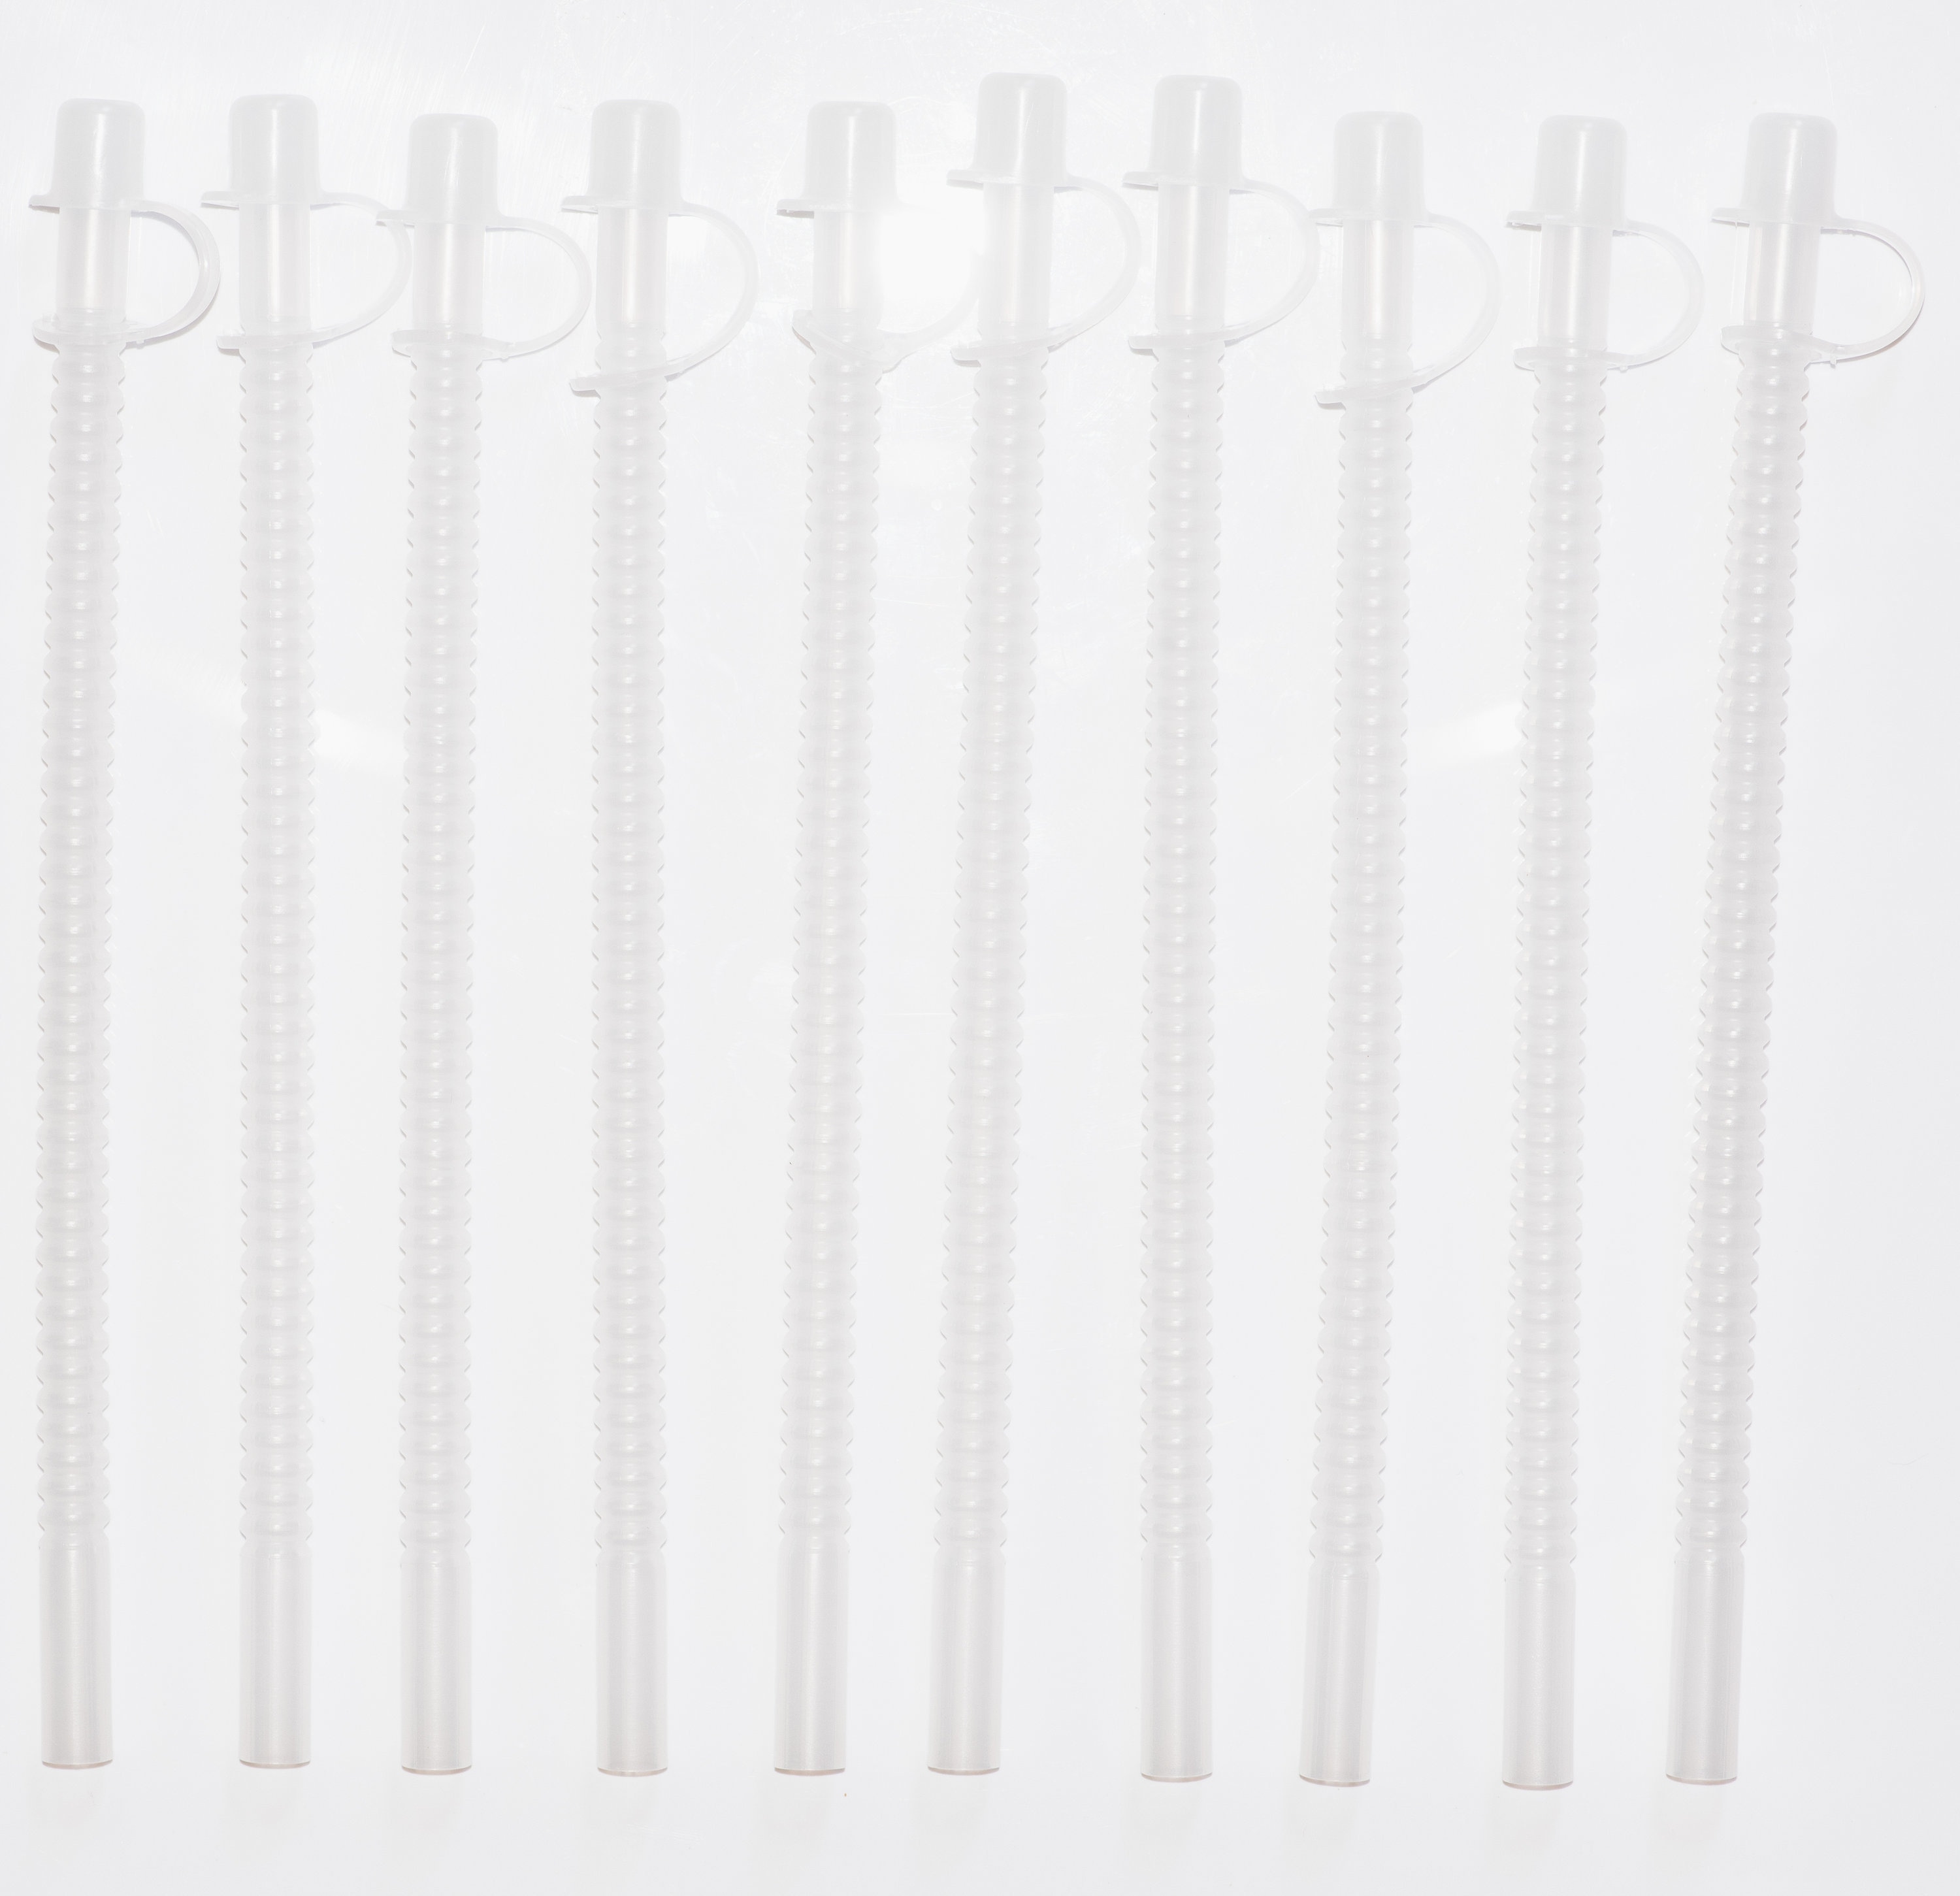 13 Inch Long Flexible Reusable Straws with Natural (Clear) Straw